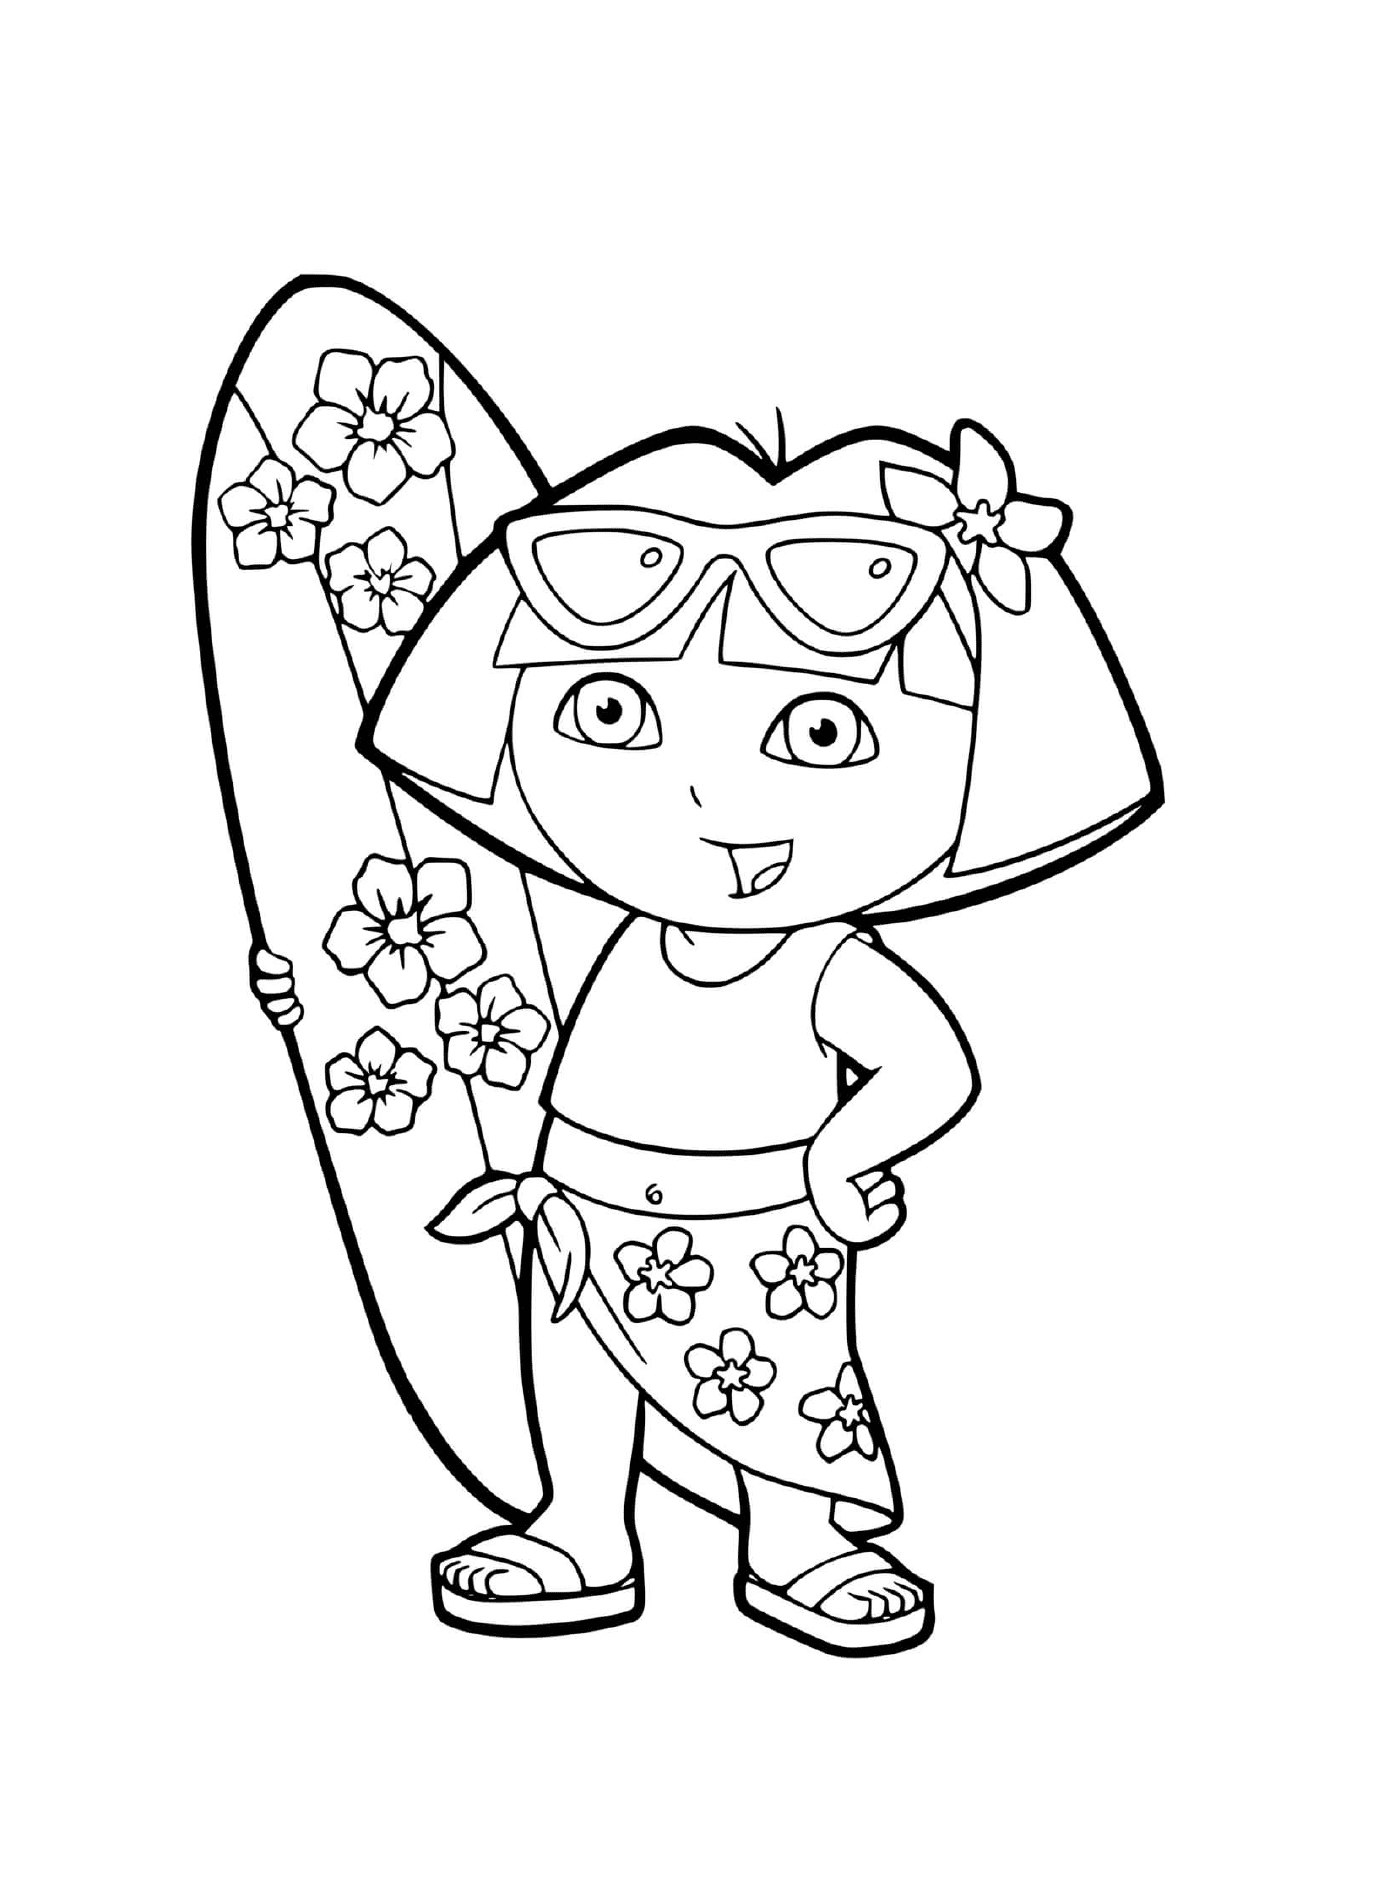  Dora surfs by the beach with enthusiasm 